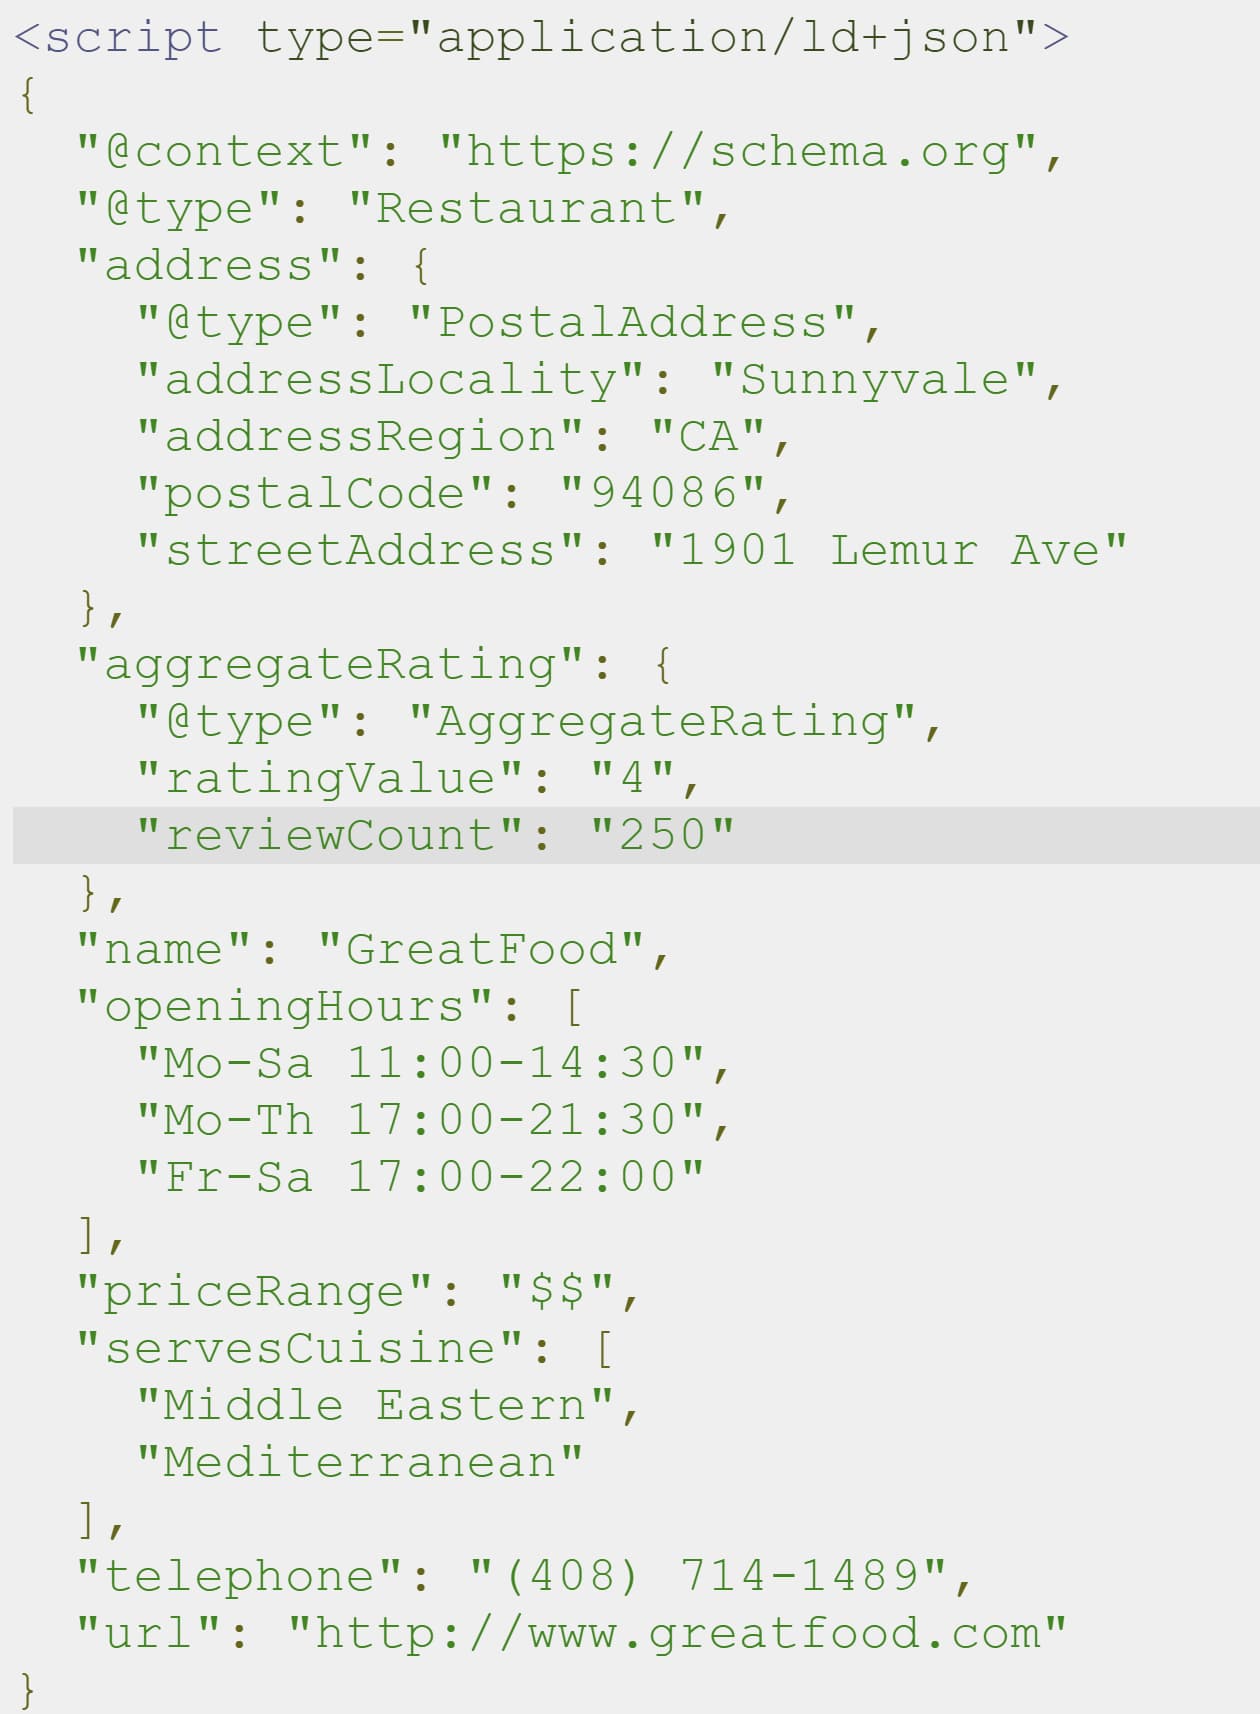 Example of a local business schema code in JSON-LD format, which would be used for JavaScript.